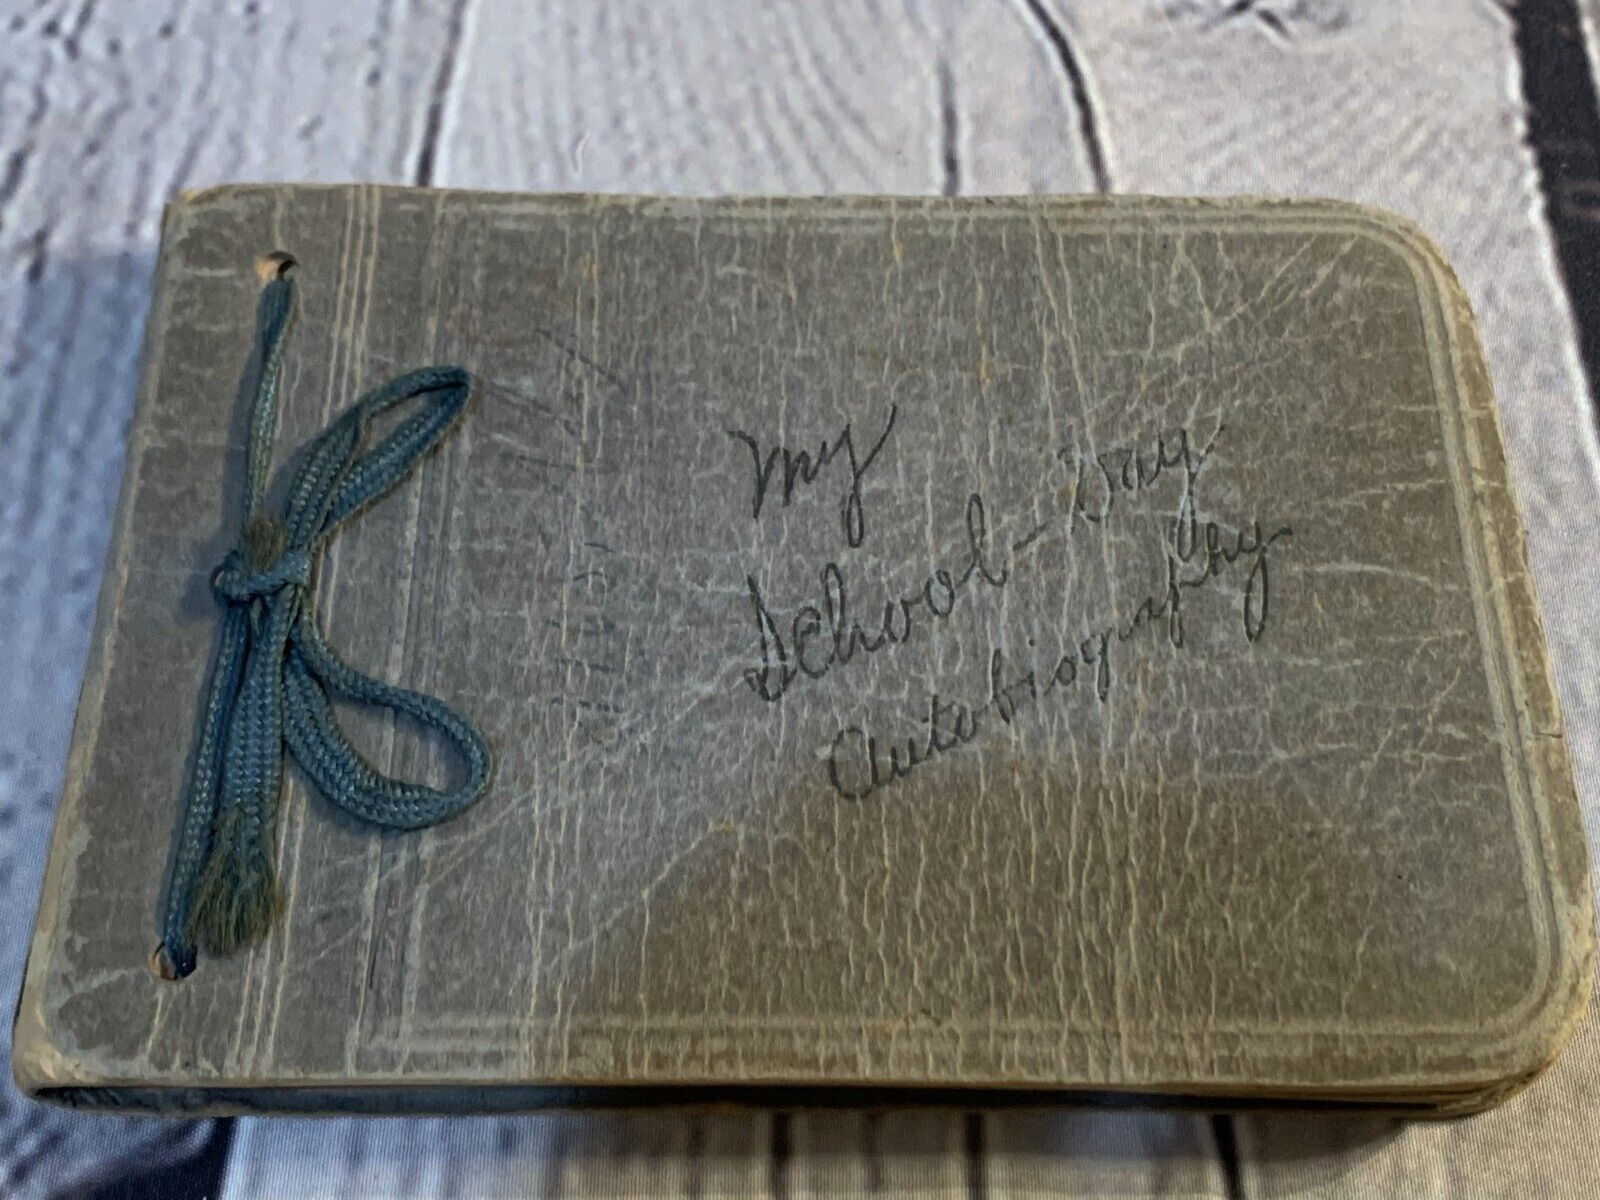 VTG 1920s My School-Day Autograph Signed Leather Bound Book, handwritten notes